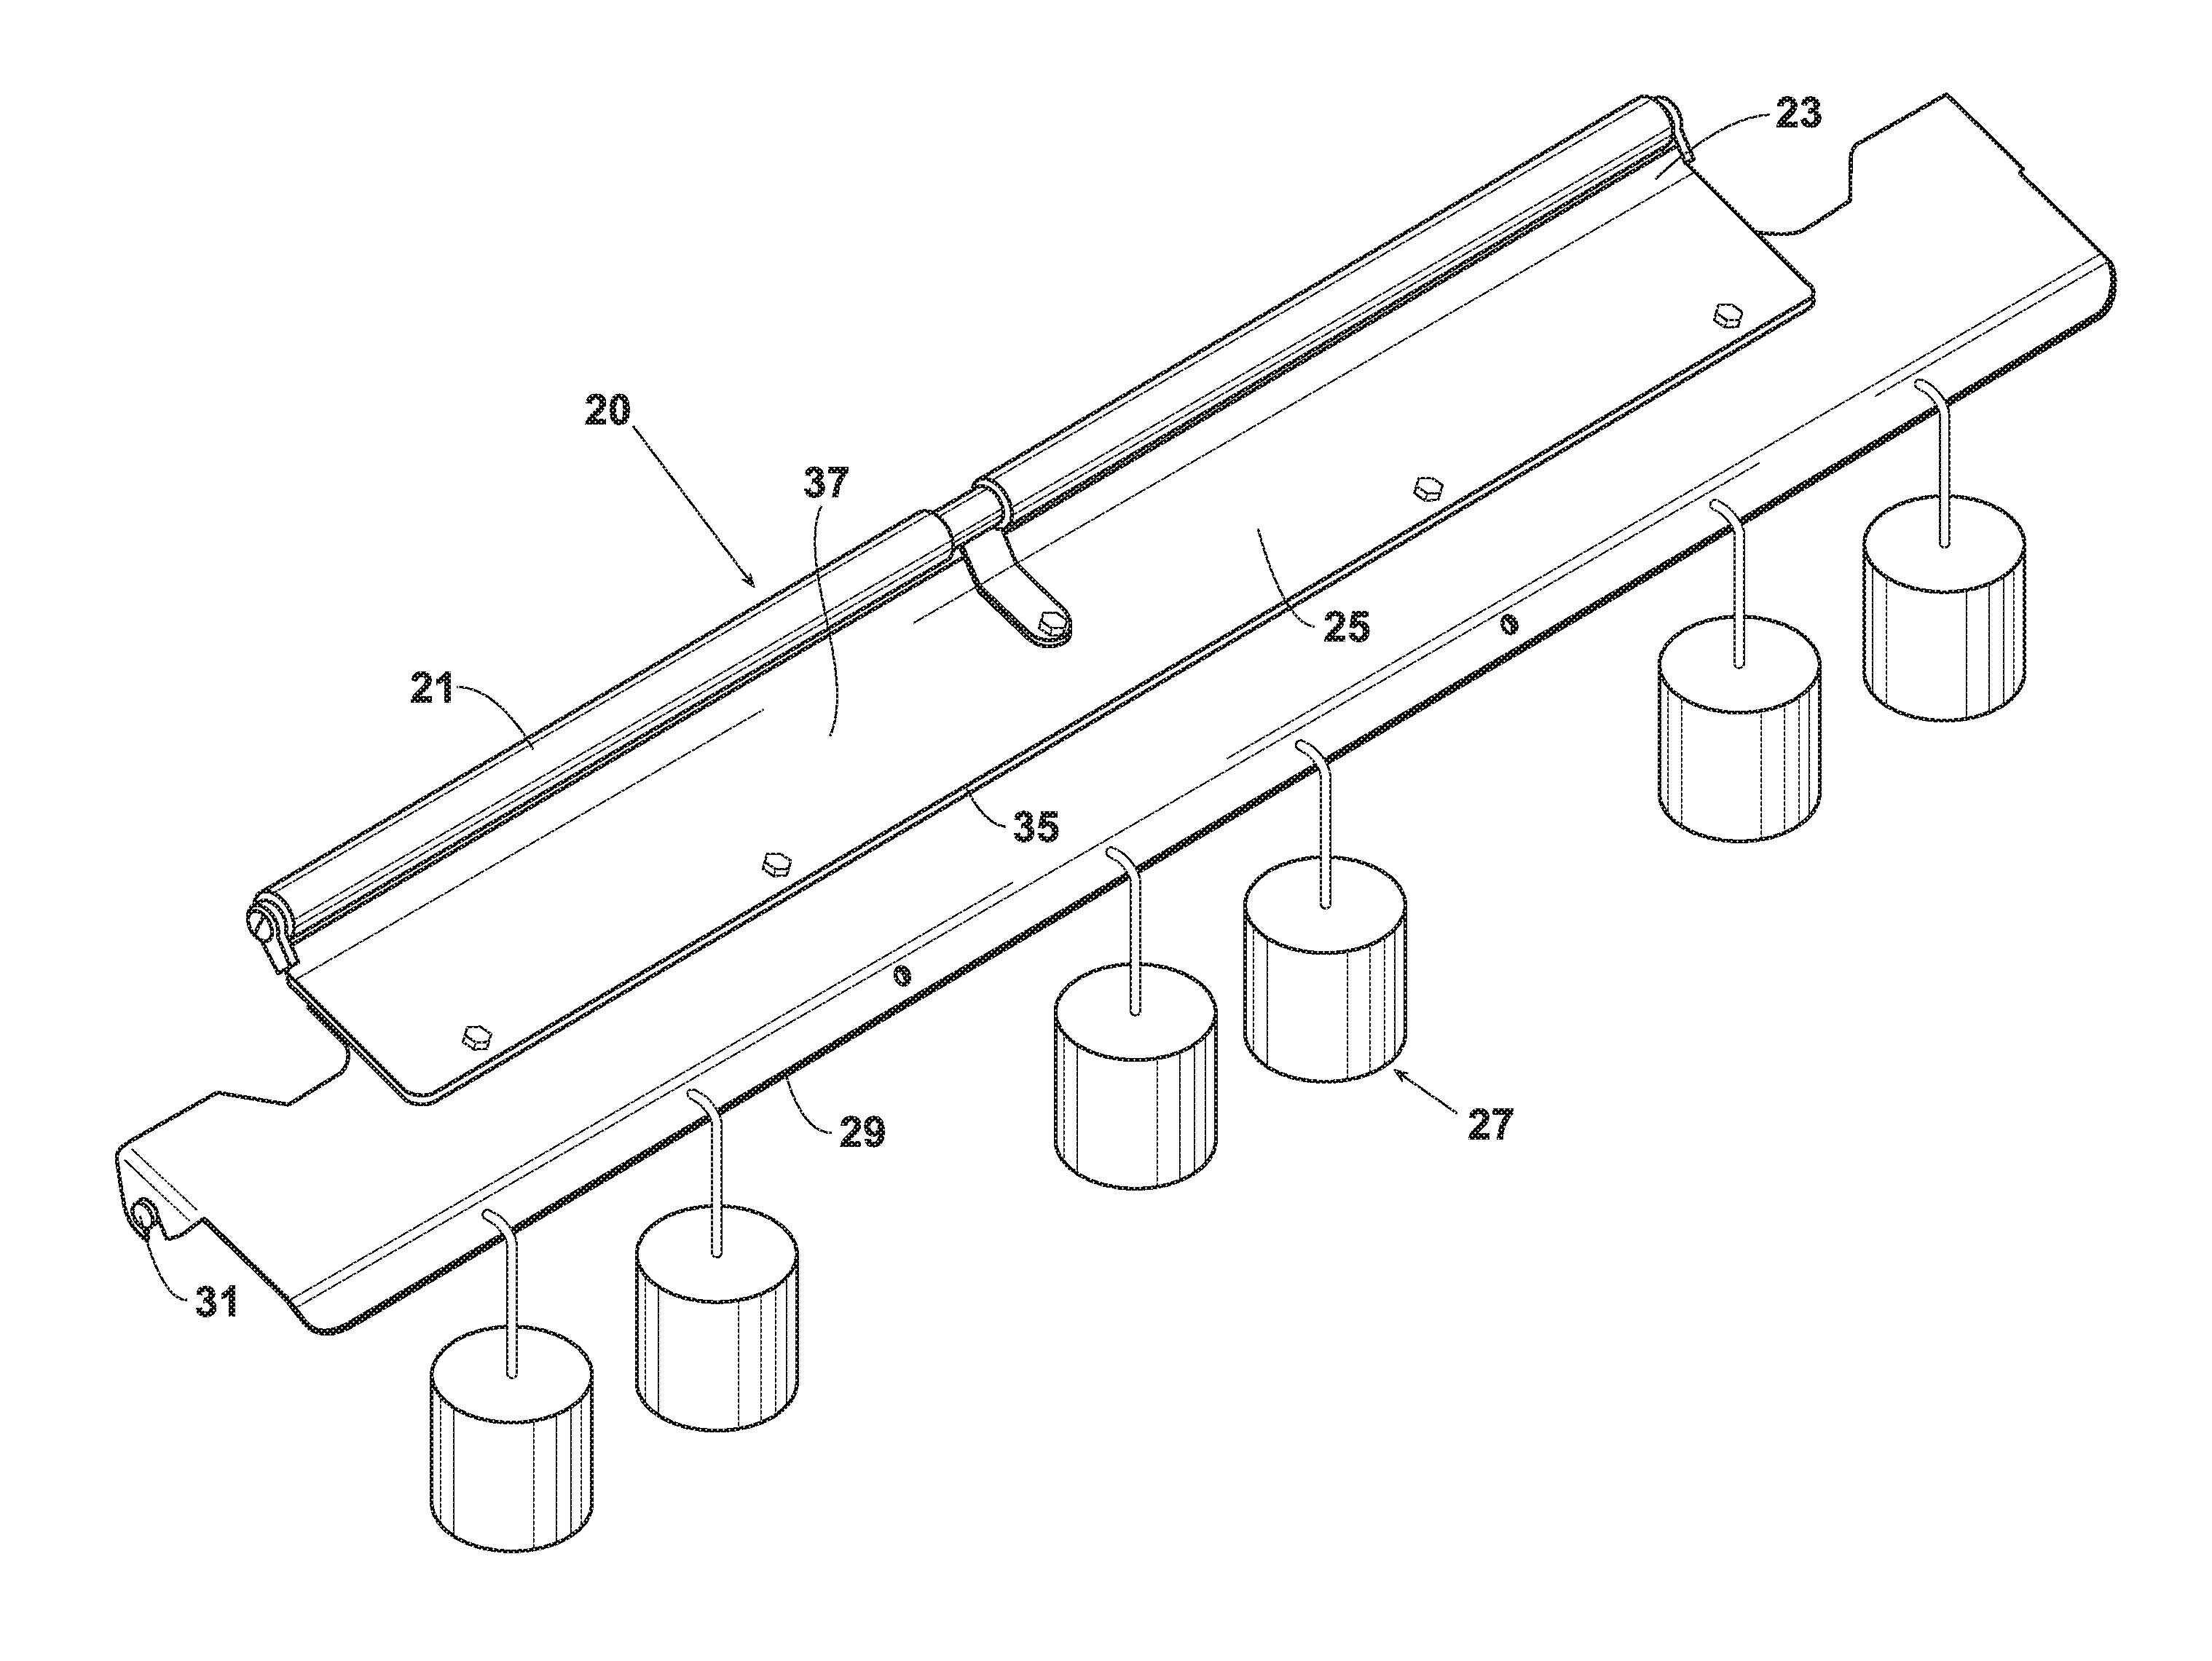 Transfer mechanism for a continuous heat transfer system